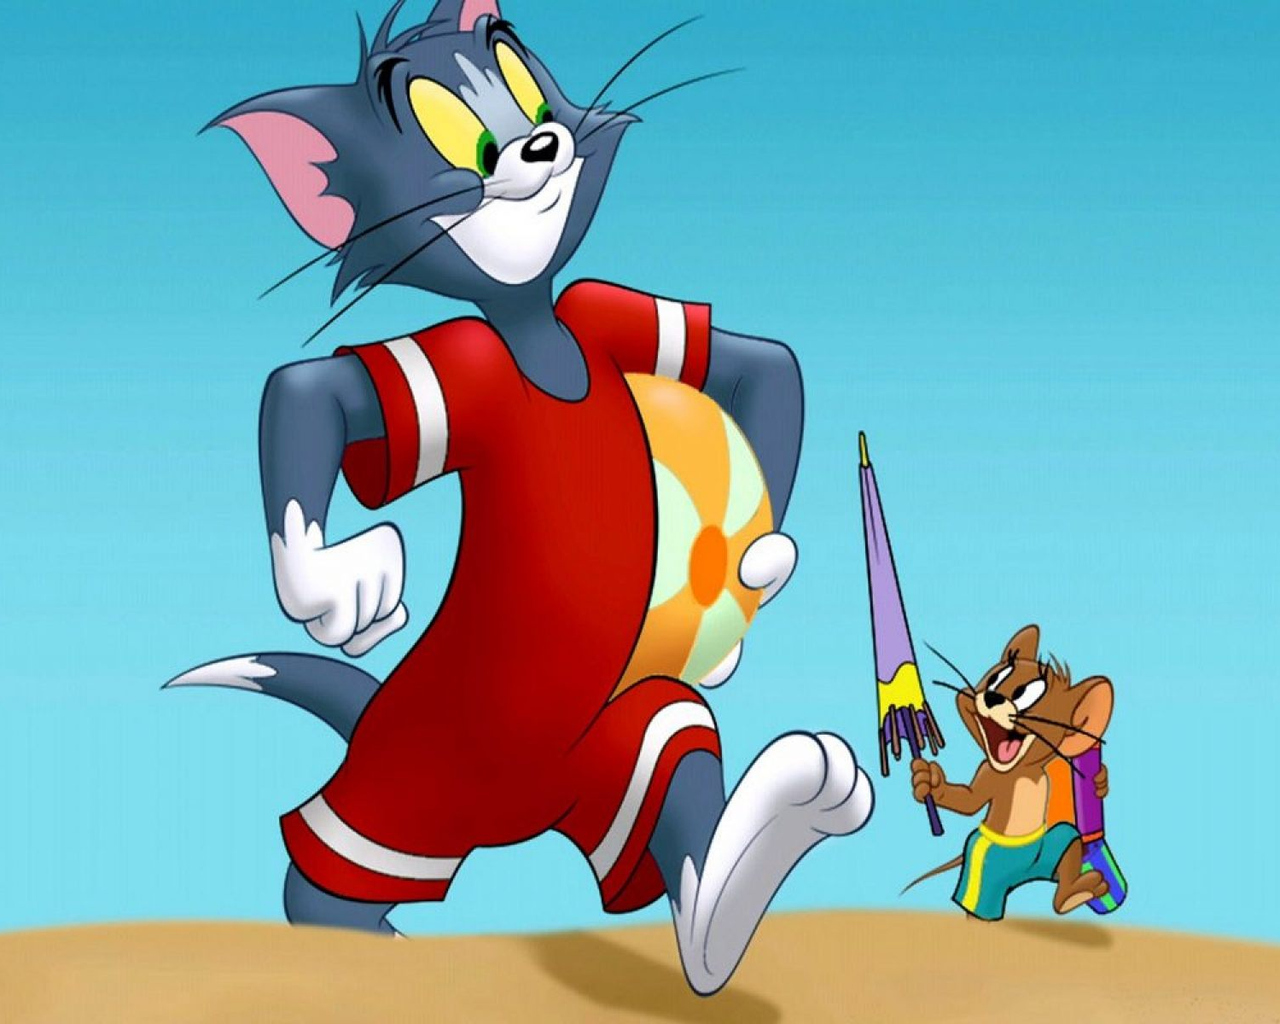 Download Tom and Jerry, Tom, Jerry Wallpaper in 1280x1024 Resolution